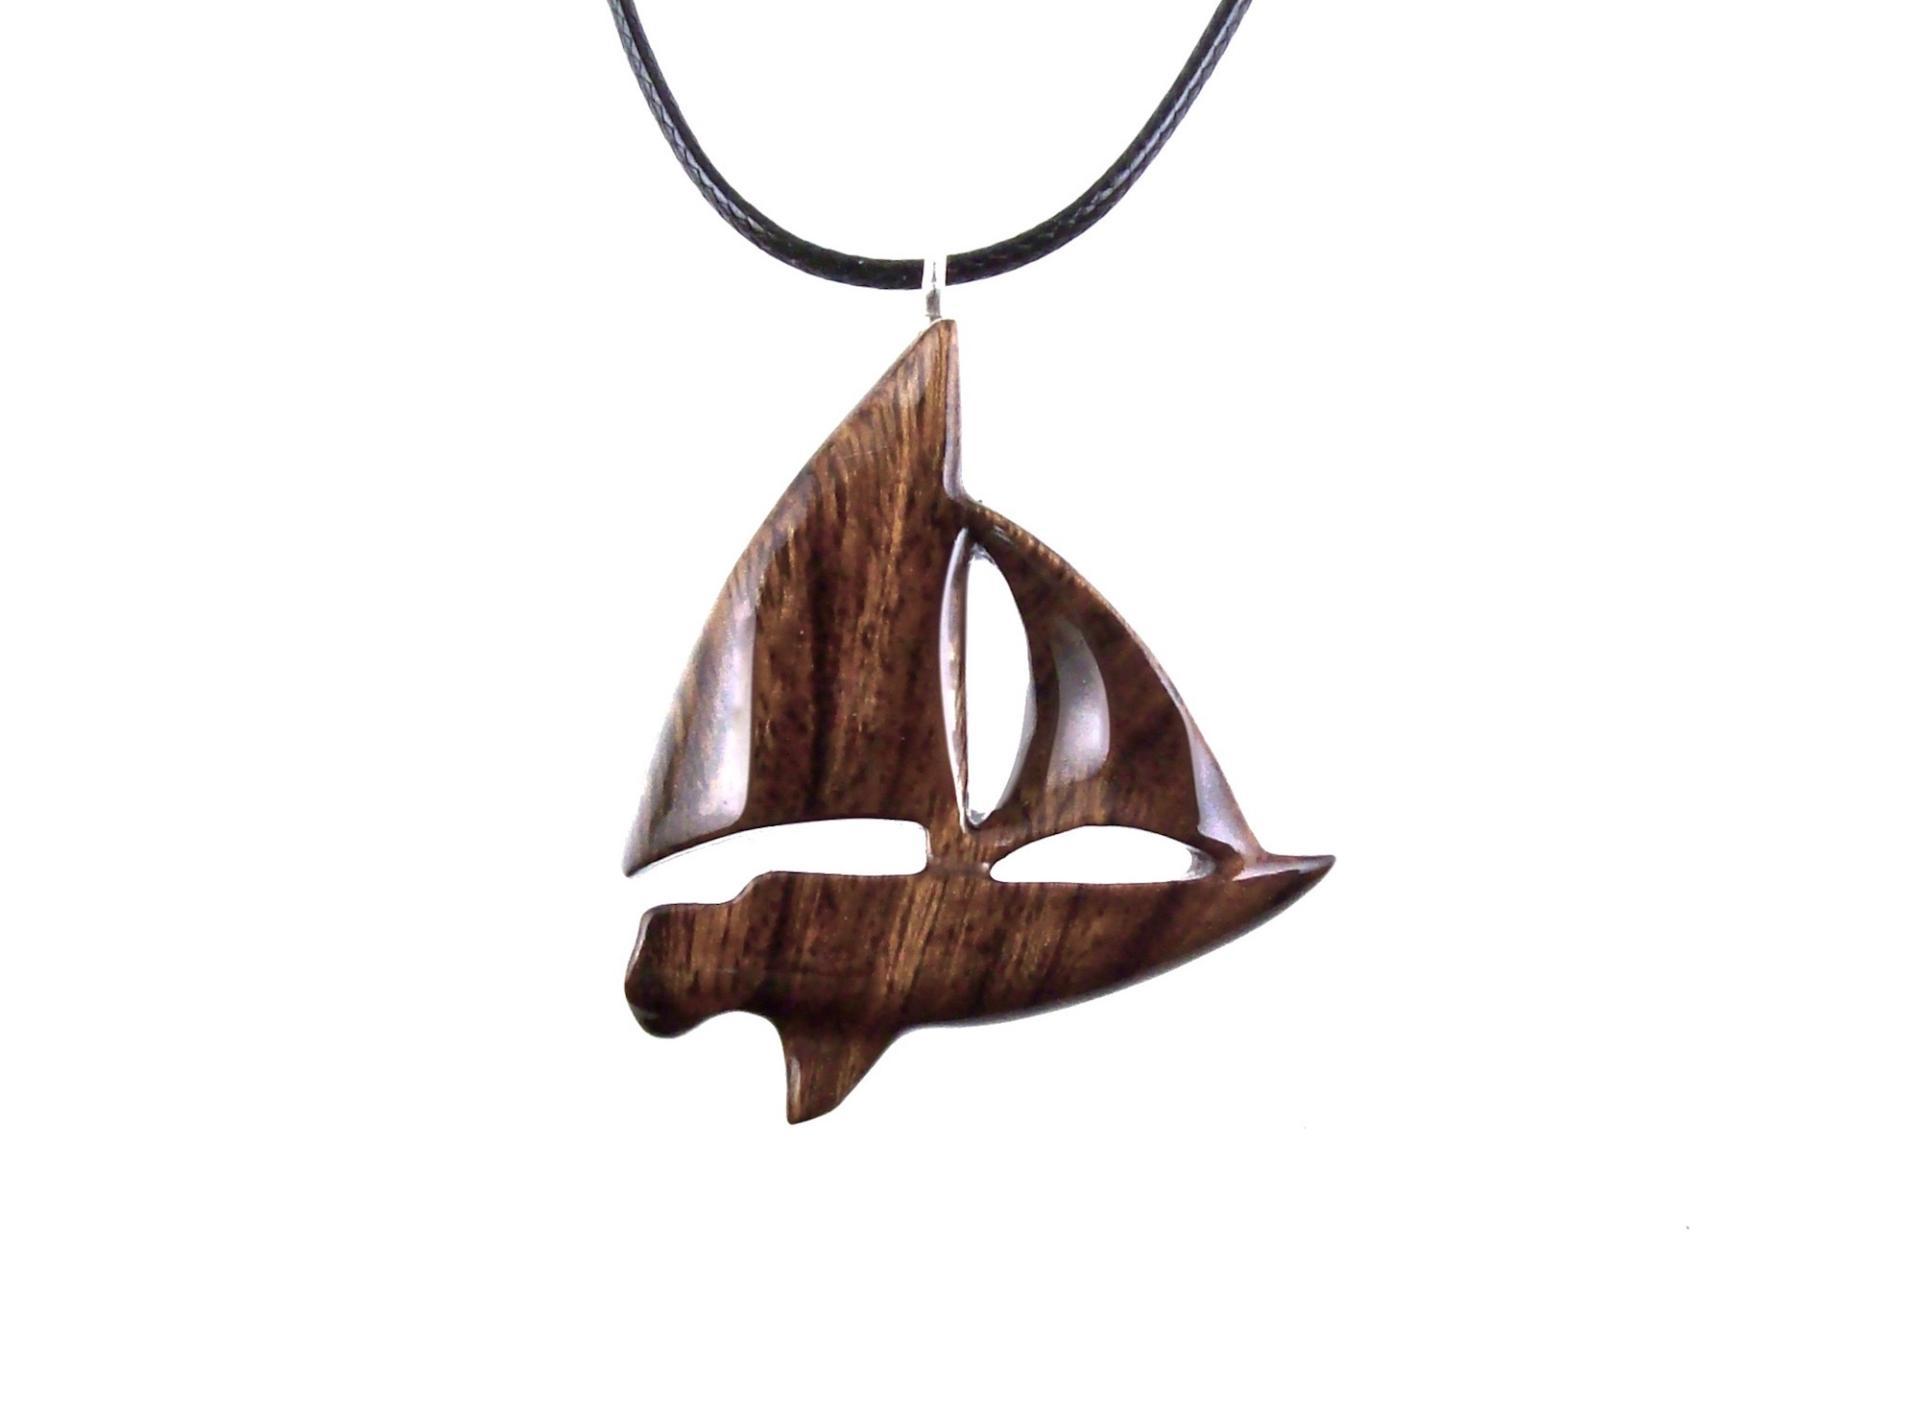 Sailboat Necklace, Hand Carved Wooden Sailboat Pendant, Wood Boat Necklace, Nautical Jewelry for Men or Women, One of a Kind Gift